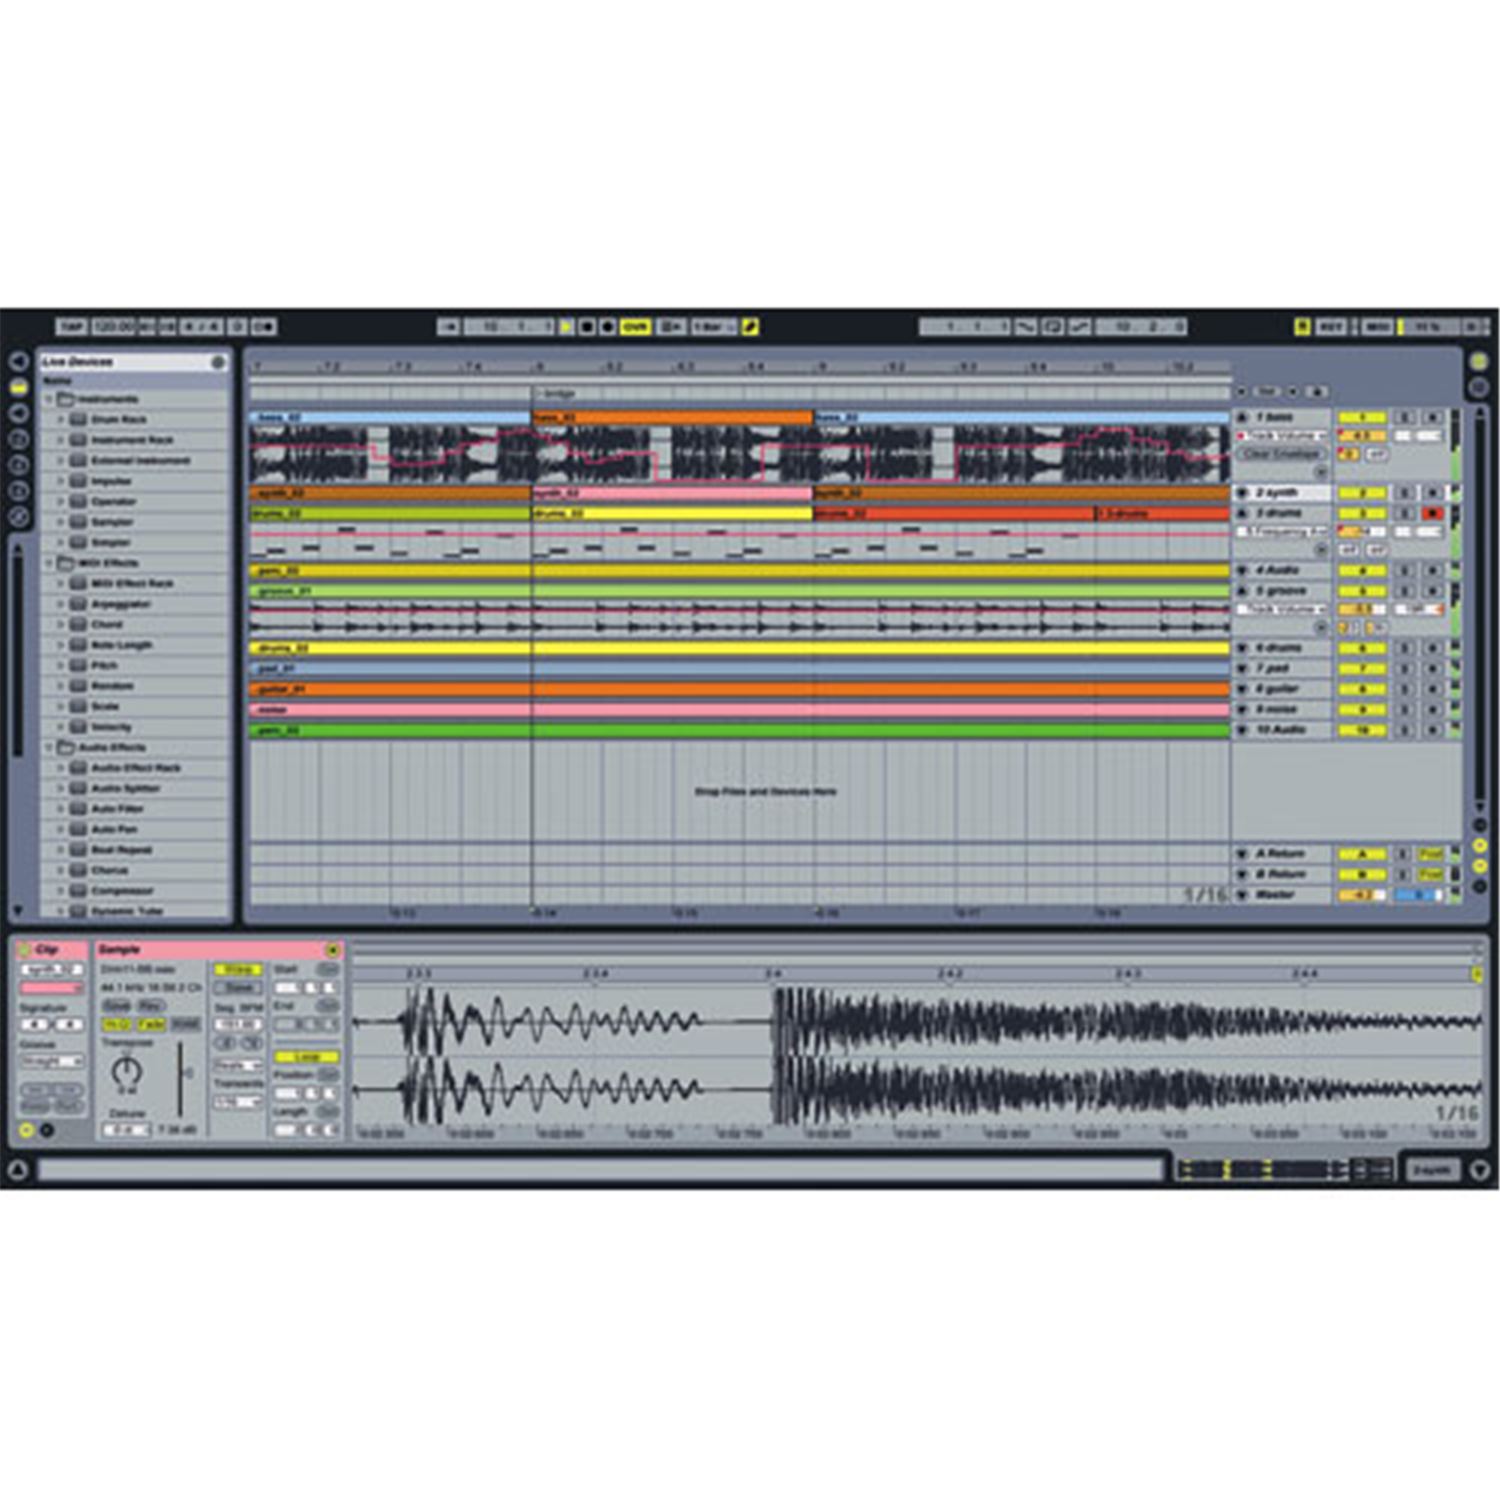 how to download ableton live 9 full version for free windows no virus